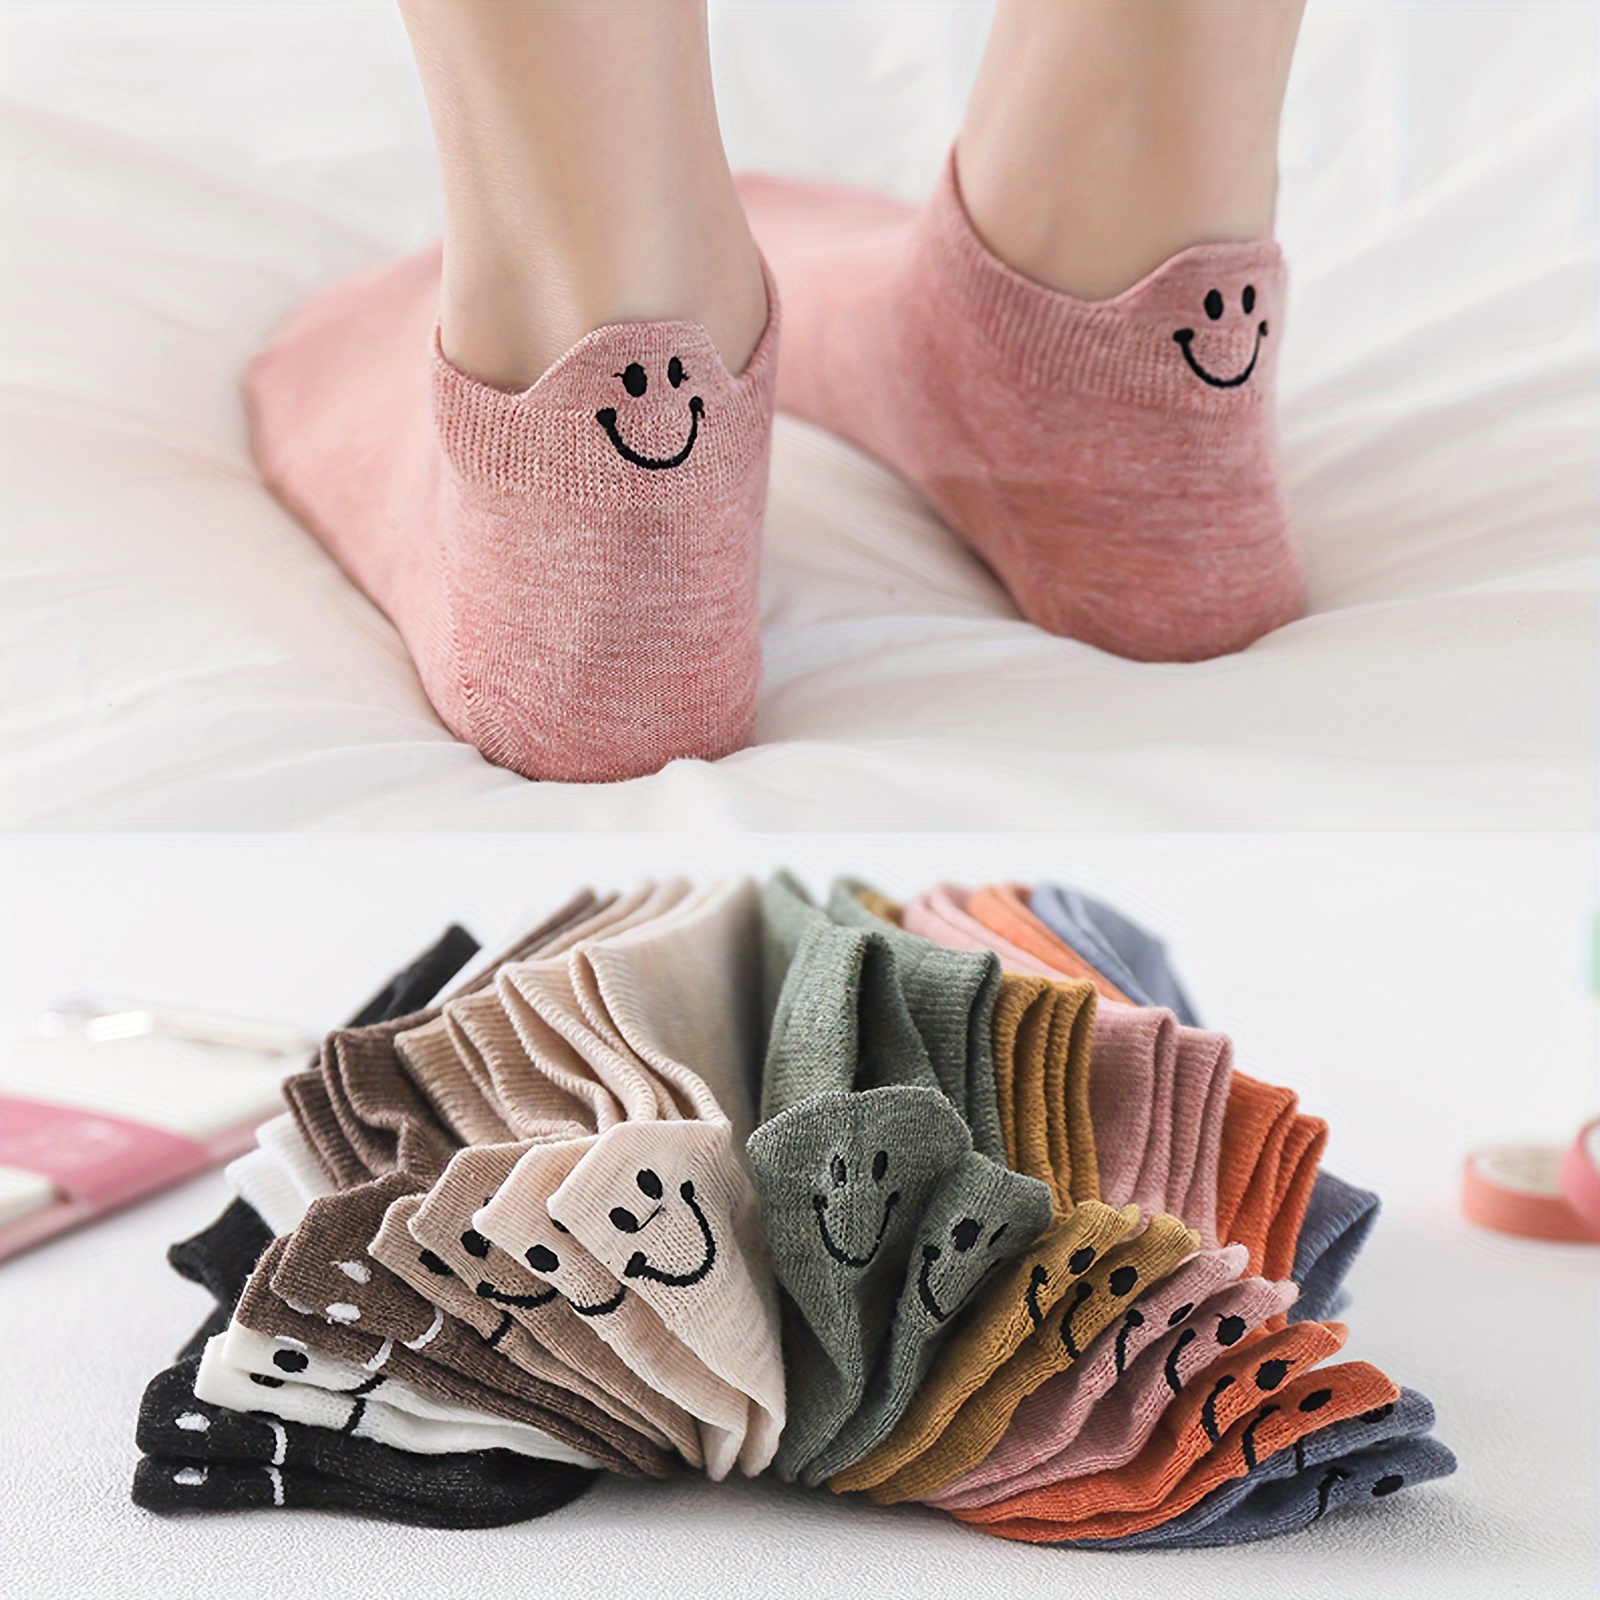 

5/10/20 Pairs Simple Smiling Face Embroidered Ankle Socks, Comfy & Breathable Short Socks, Women's Stockings & Hosiery